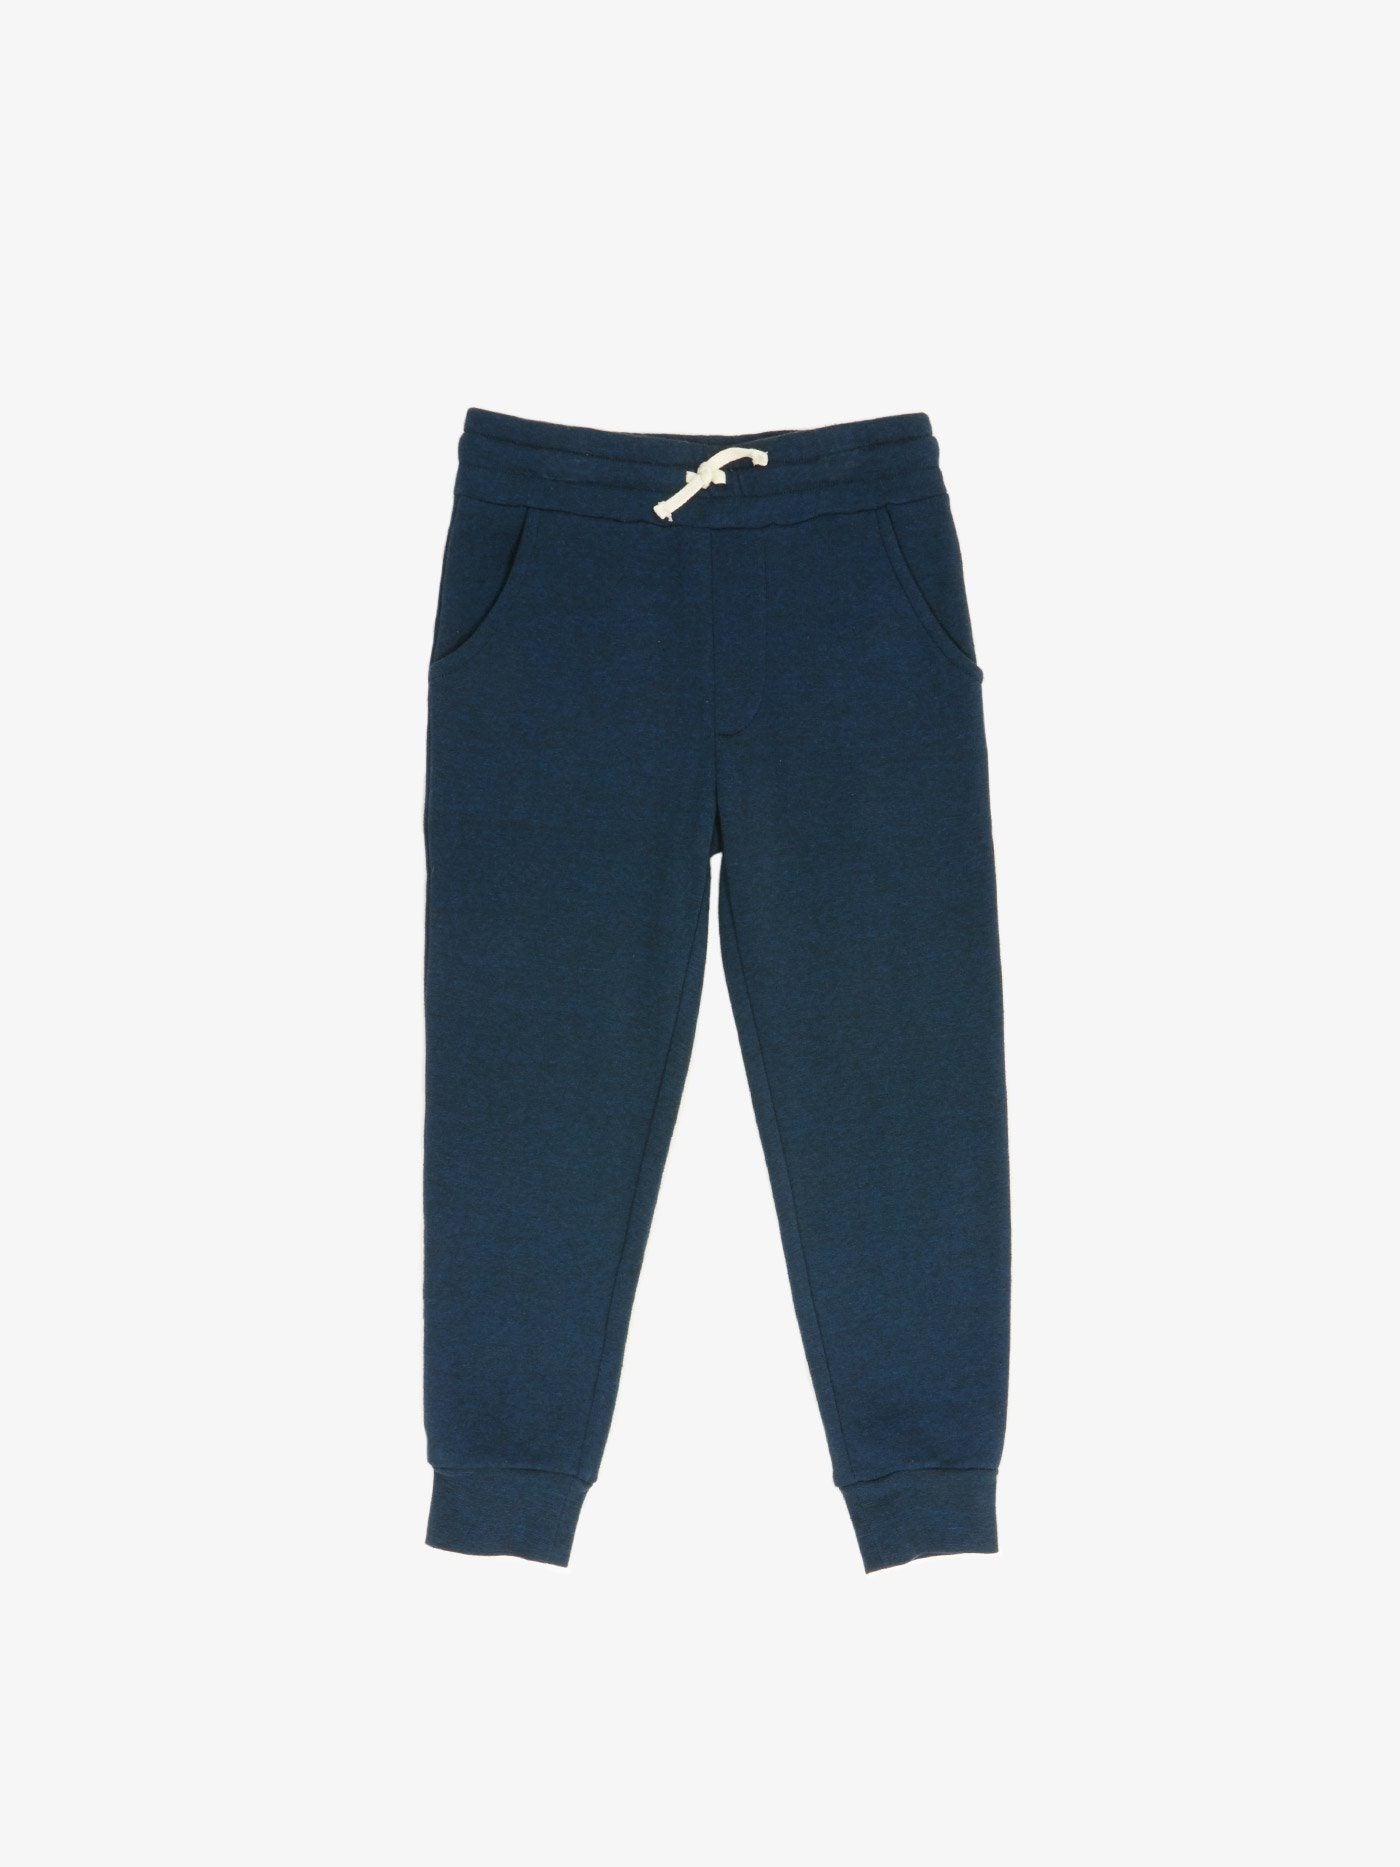 Boy's Sweatpants – Threads 4 Thought